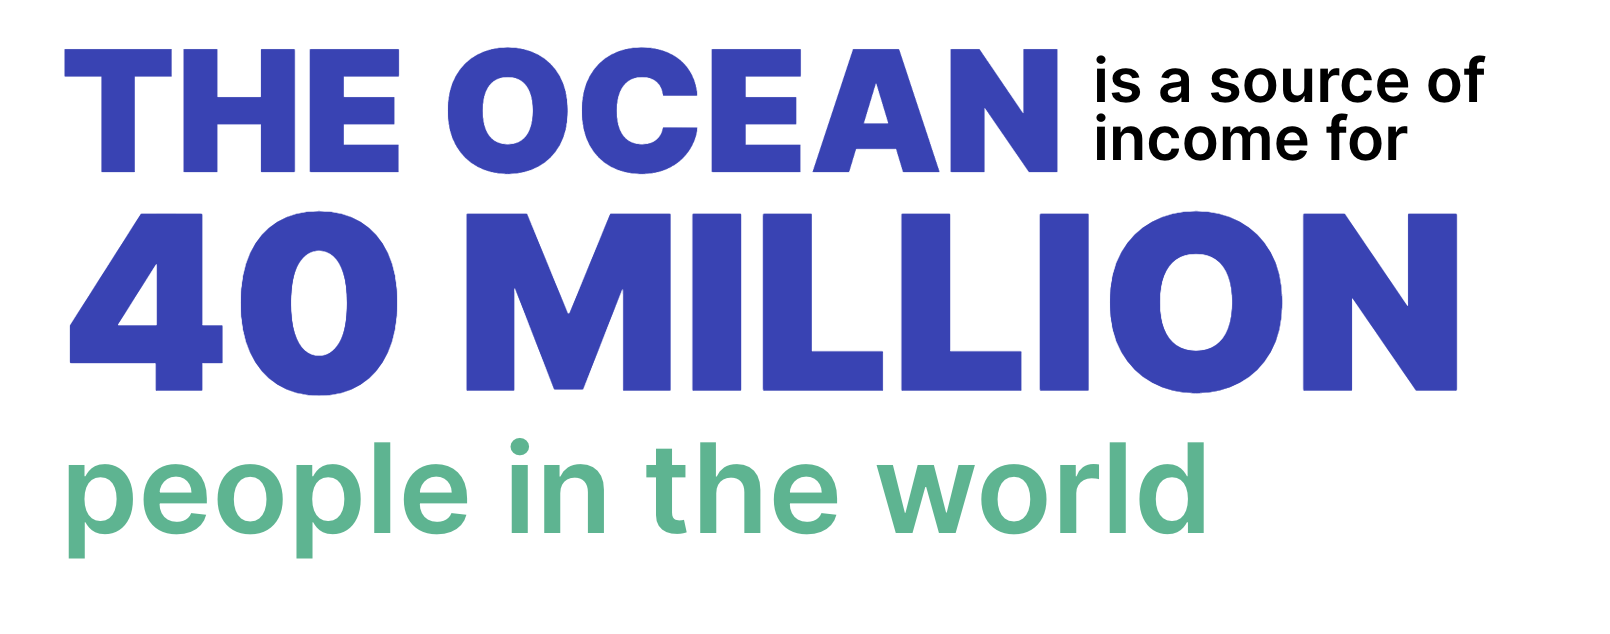 The ocean is a source of income for 40 millions people in the world